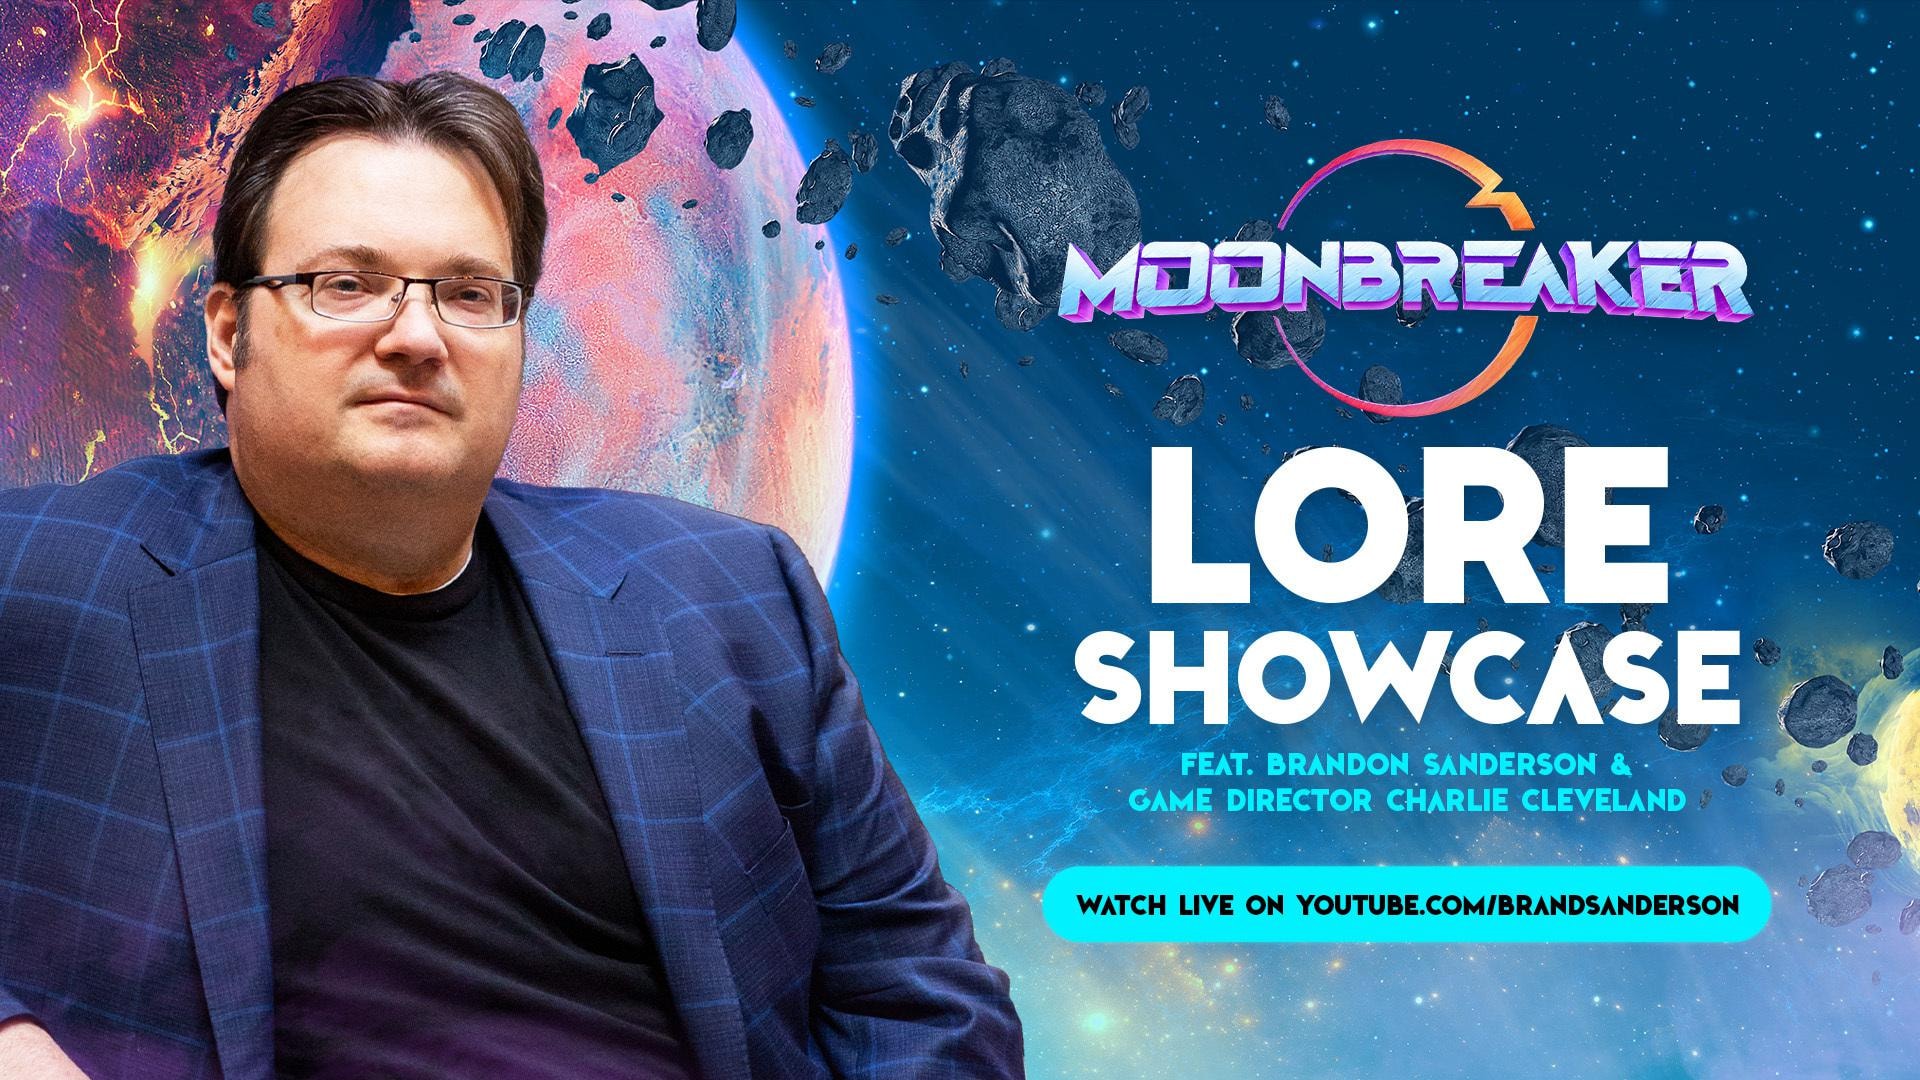 moonbreaker-lore-showcase-how-to-watch-and-start-time